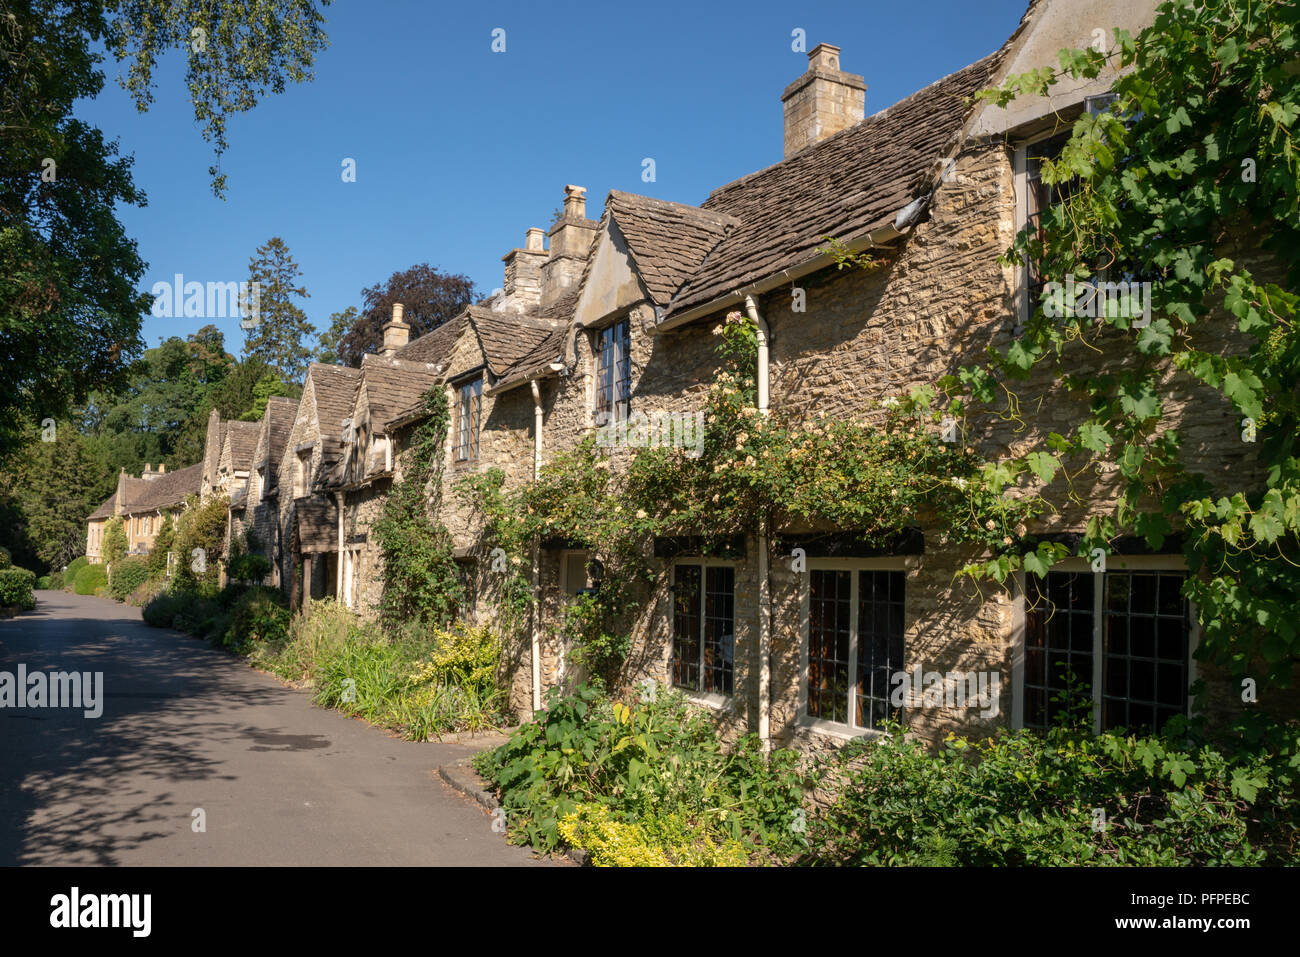 Castle Combe In Wiltshire Is Famous For Being One Of England S